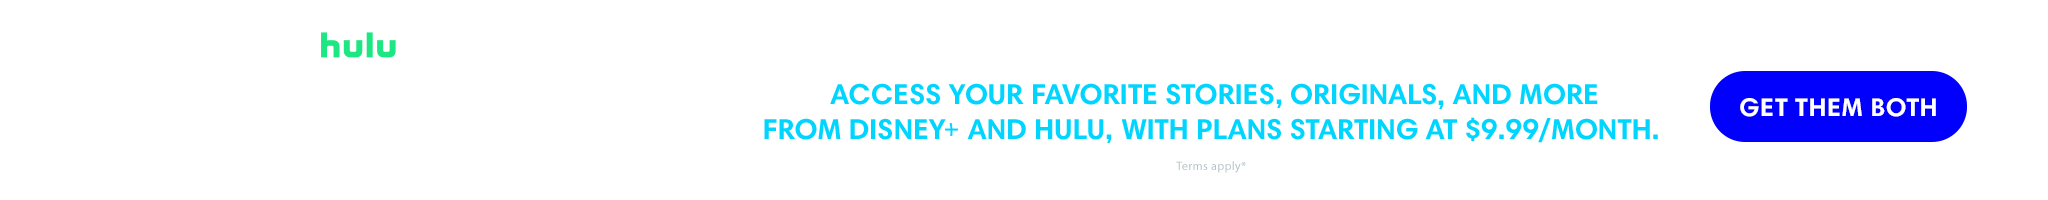 Hulu | Disney+ | Disney Bundle | Access your favorite stories, originals and more from Disney+ and Hulu with plans starting at $9.99/month. | Get them both. | 18+ only. Access content from each service separately. Offer valid for eligible subscribers only. Terms apply. © 2023 Disney and its related entities.